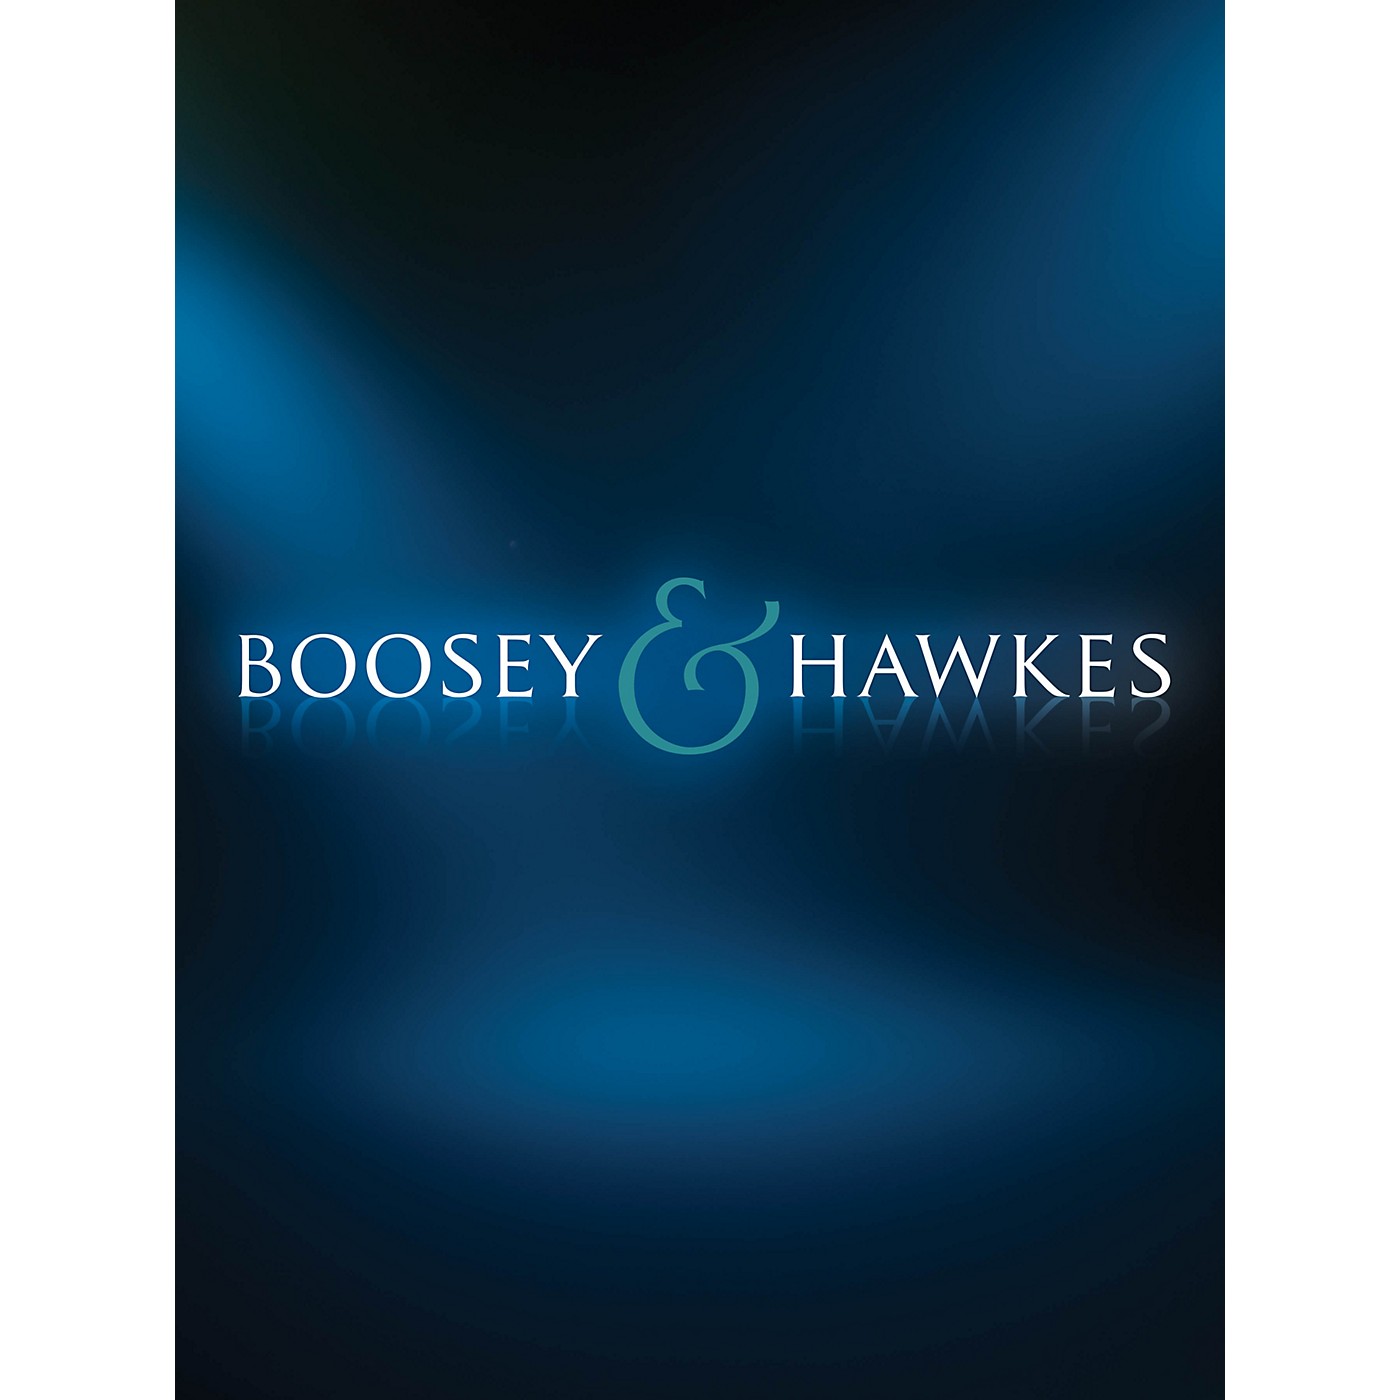 Boosey and Hawkes Mano a Mano (Solo Guitar) Boosey & Hawkes Chamber Music Series Softcover thumbnail